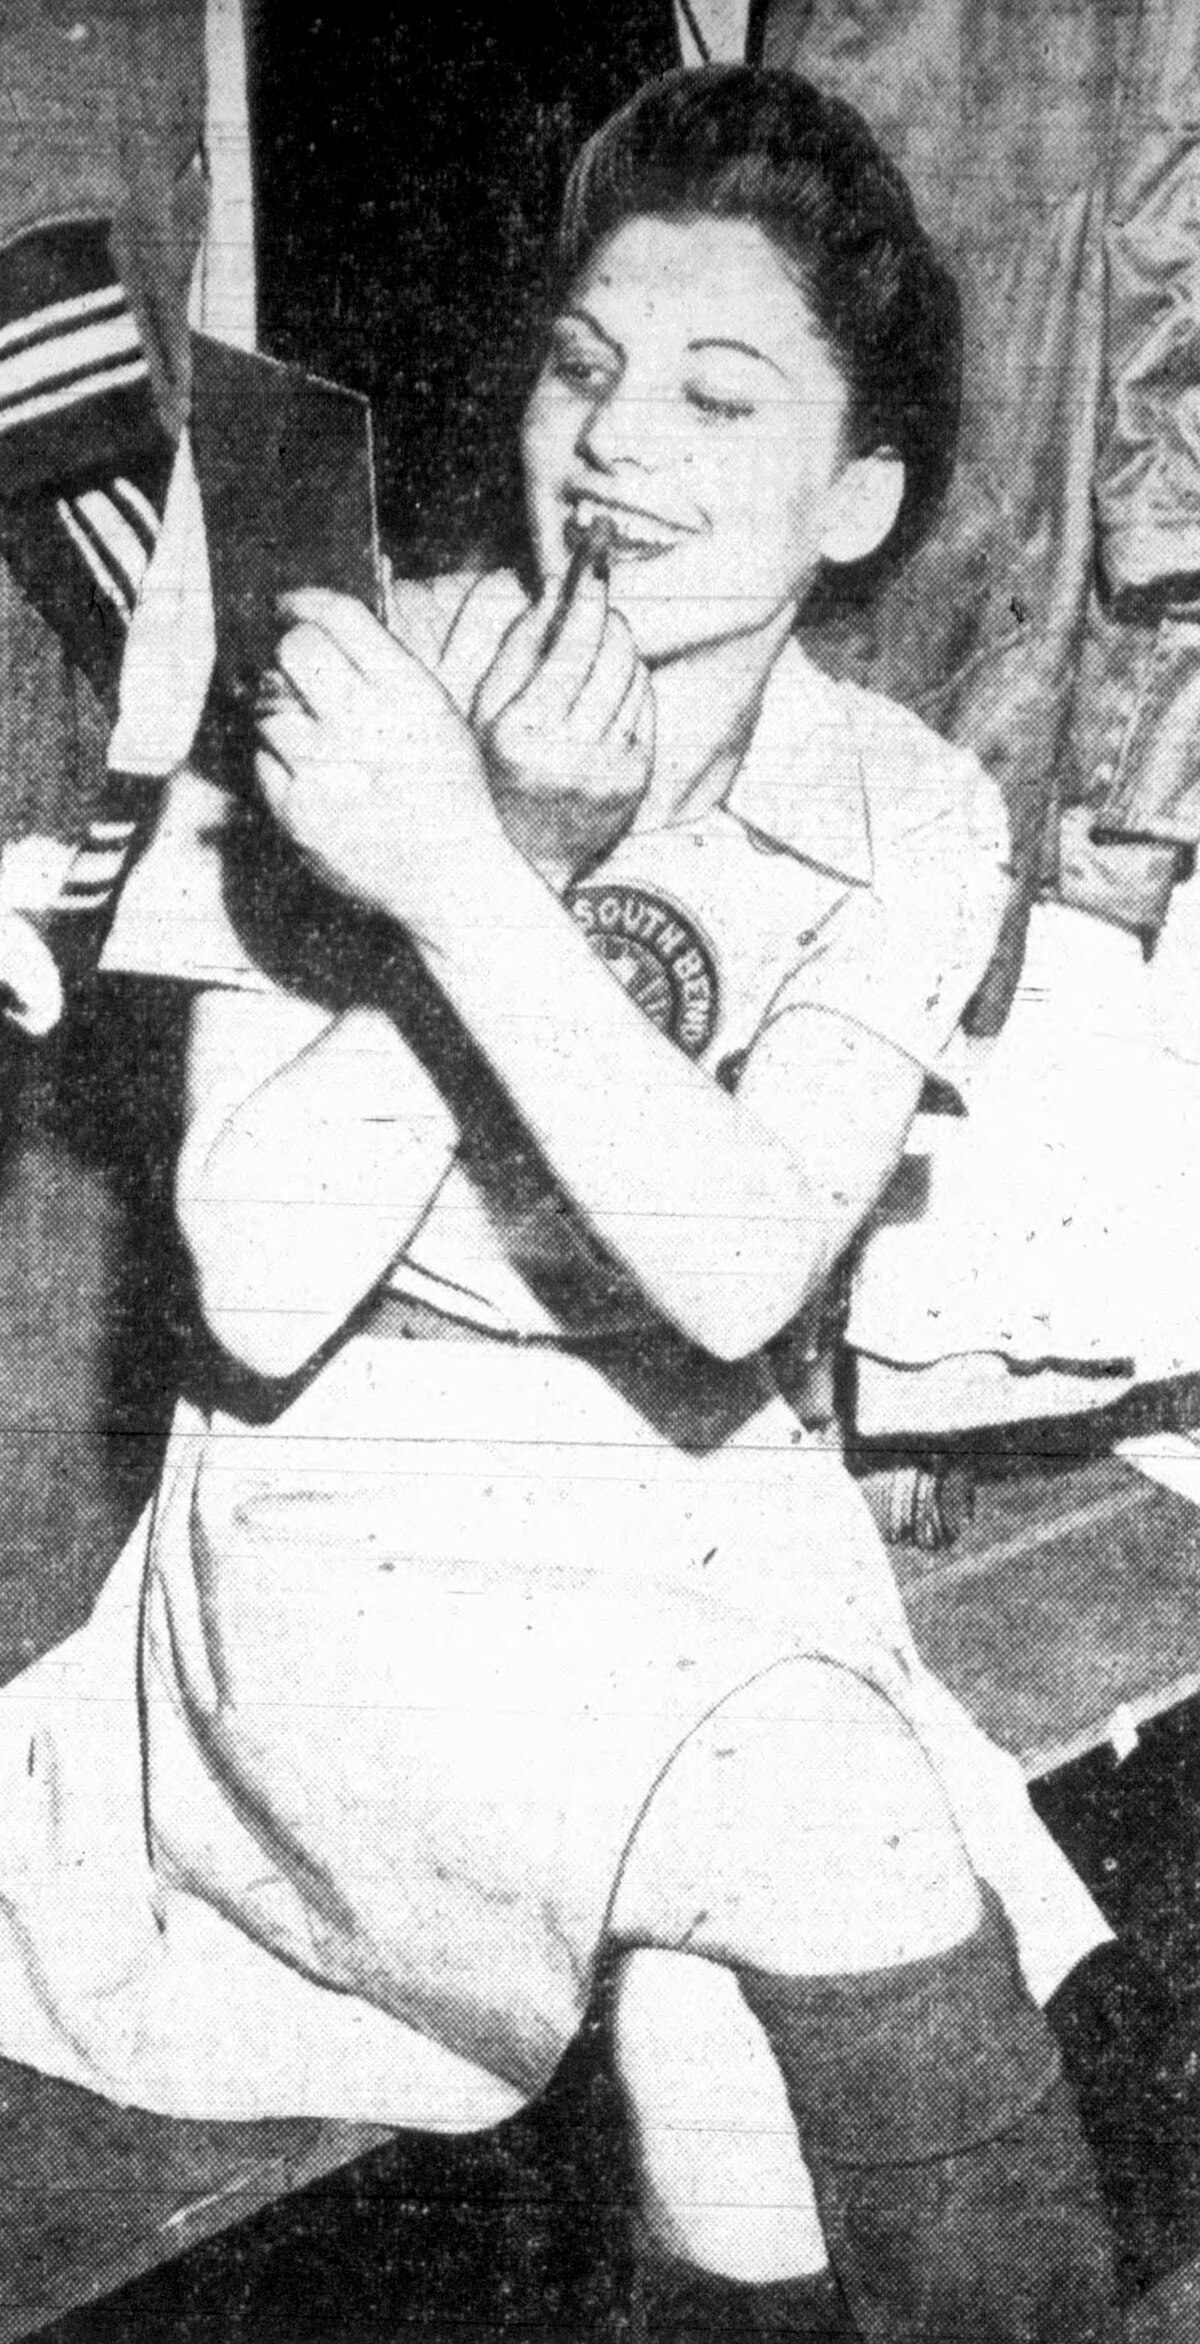 AAGPBL Article: AAGPBL: First Four Seasons - 1943 to 1946